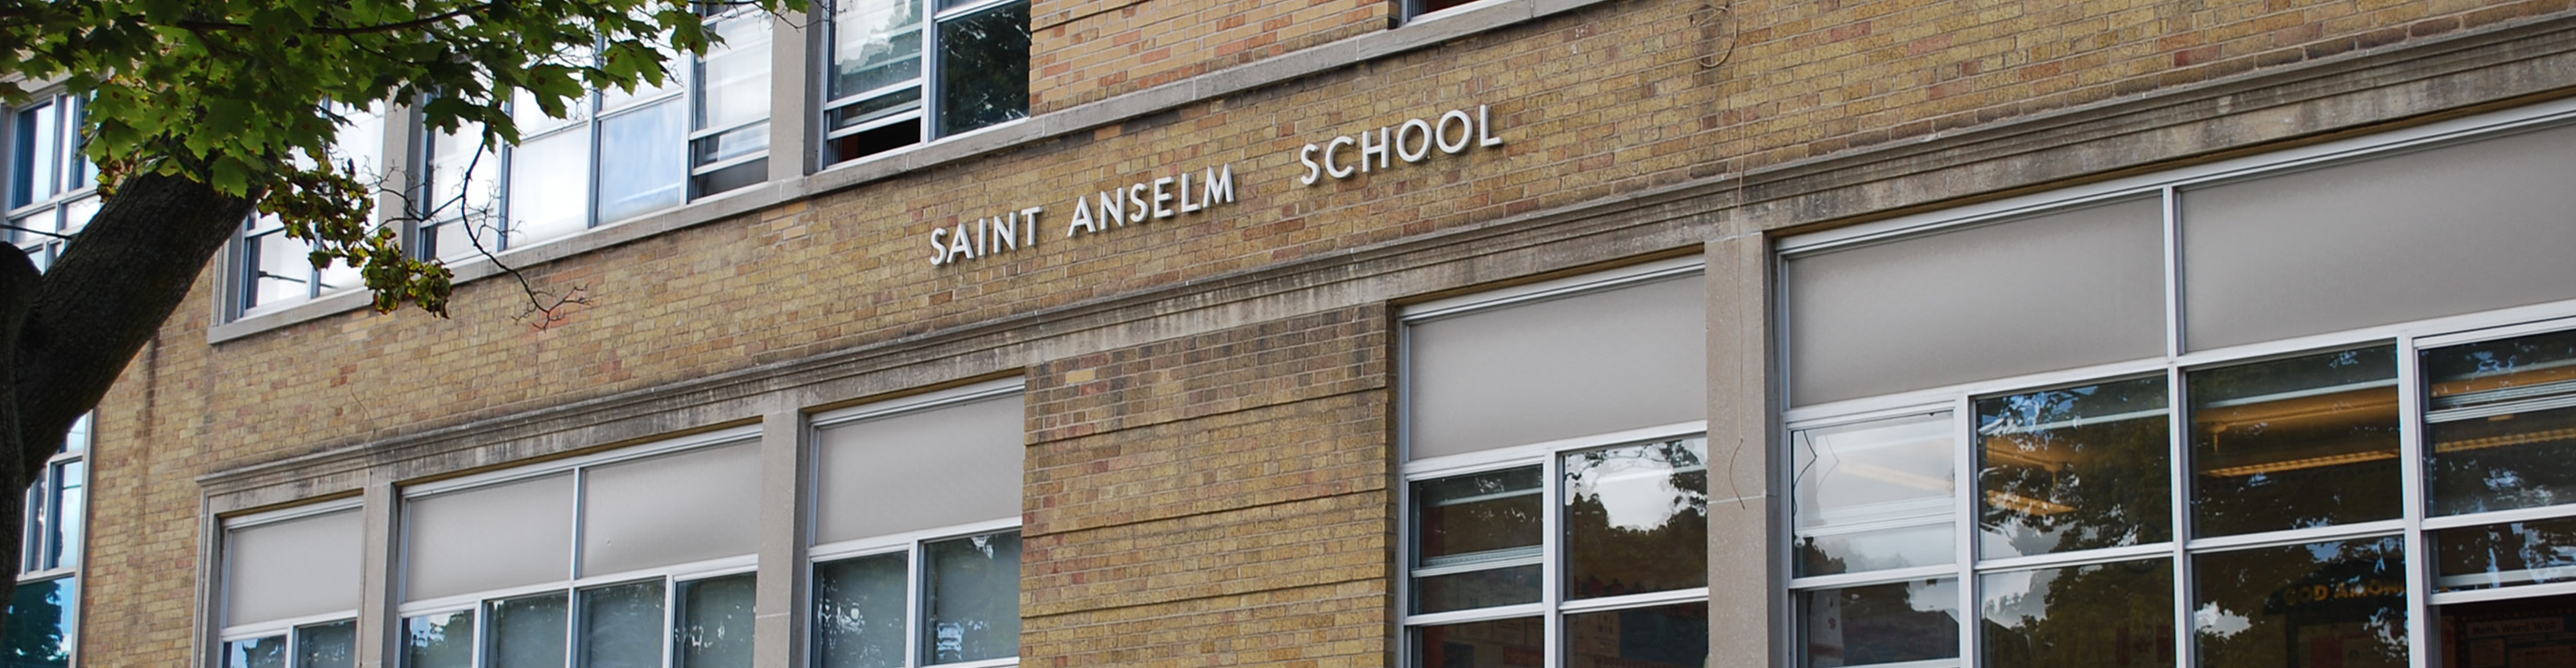 An image of the front of the school building with "Saint Anselm School" written on it.